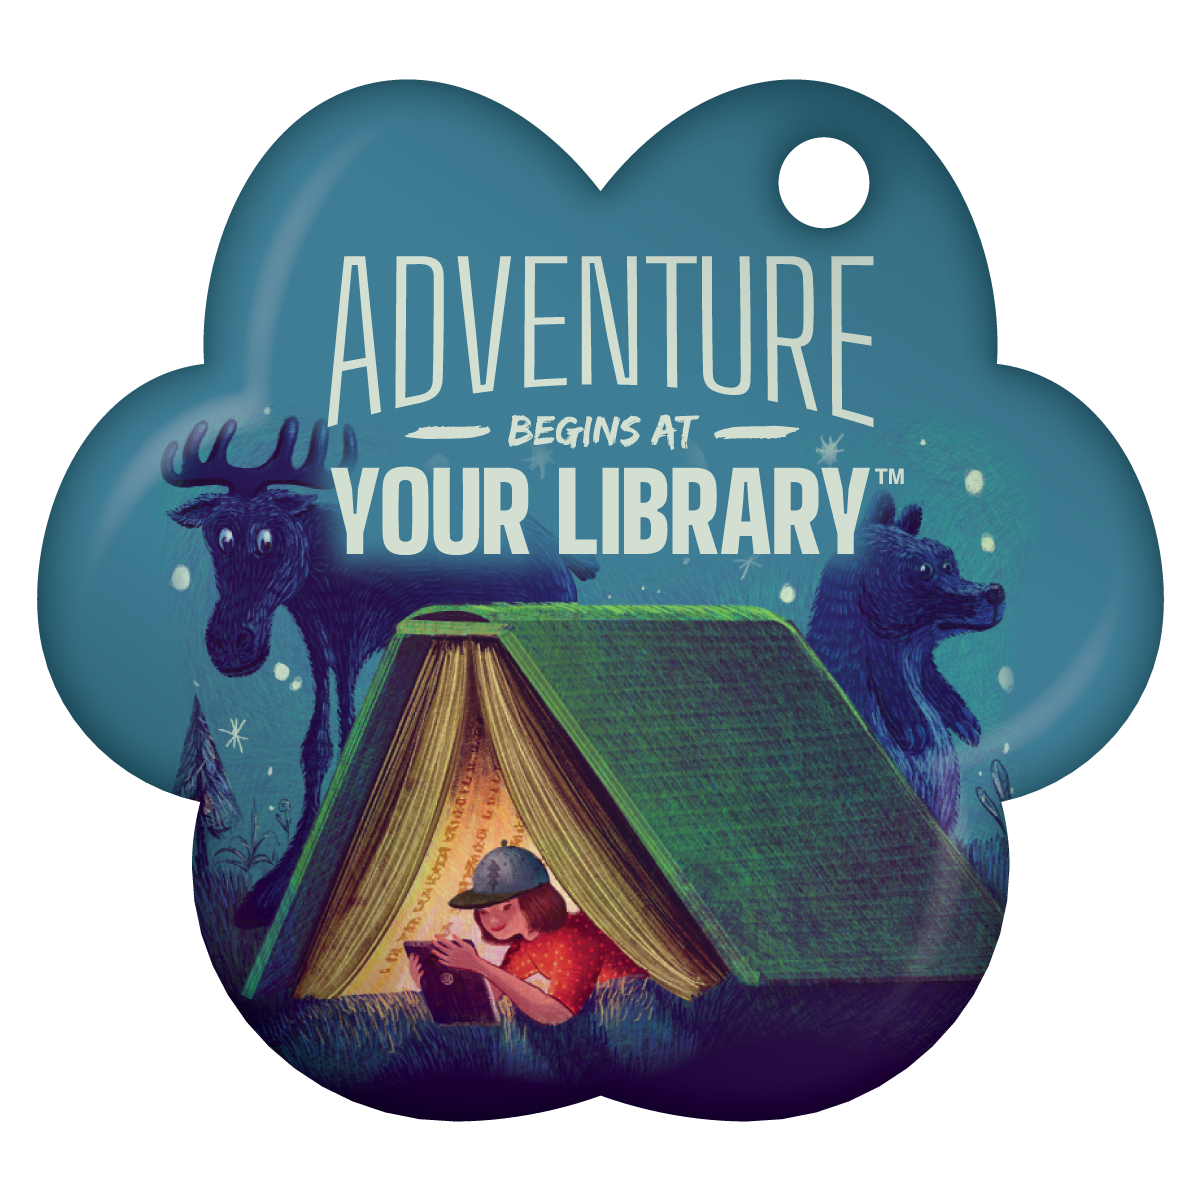 Adventure begins at your library logo with image of girl reading in book tent